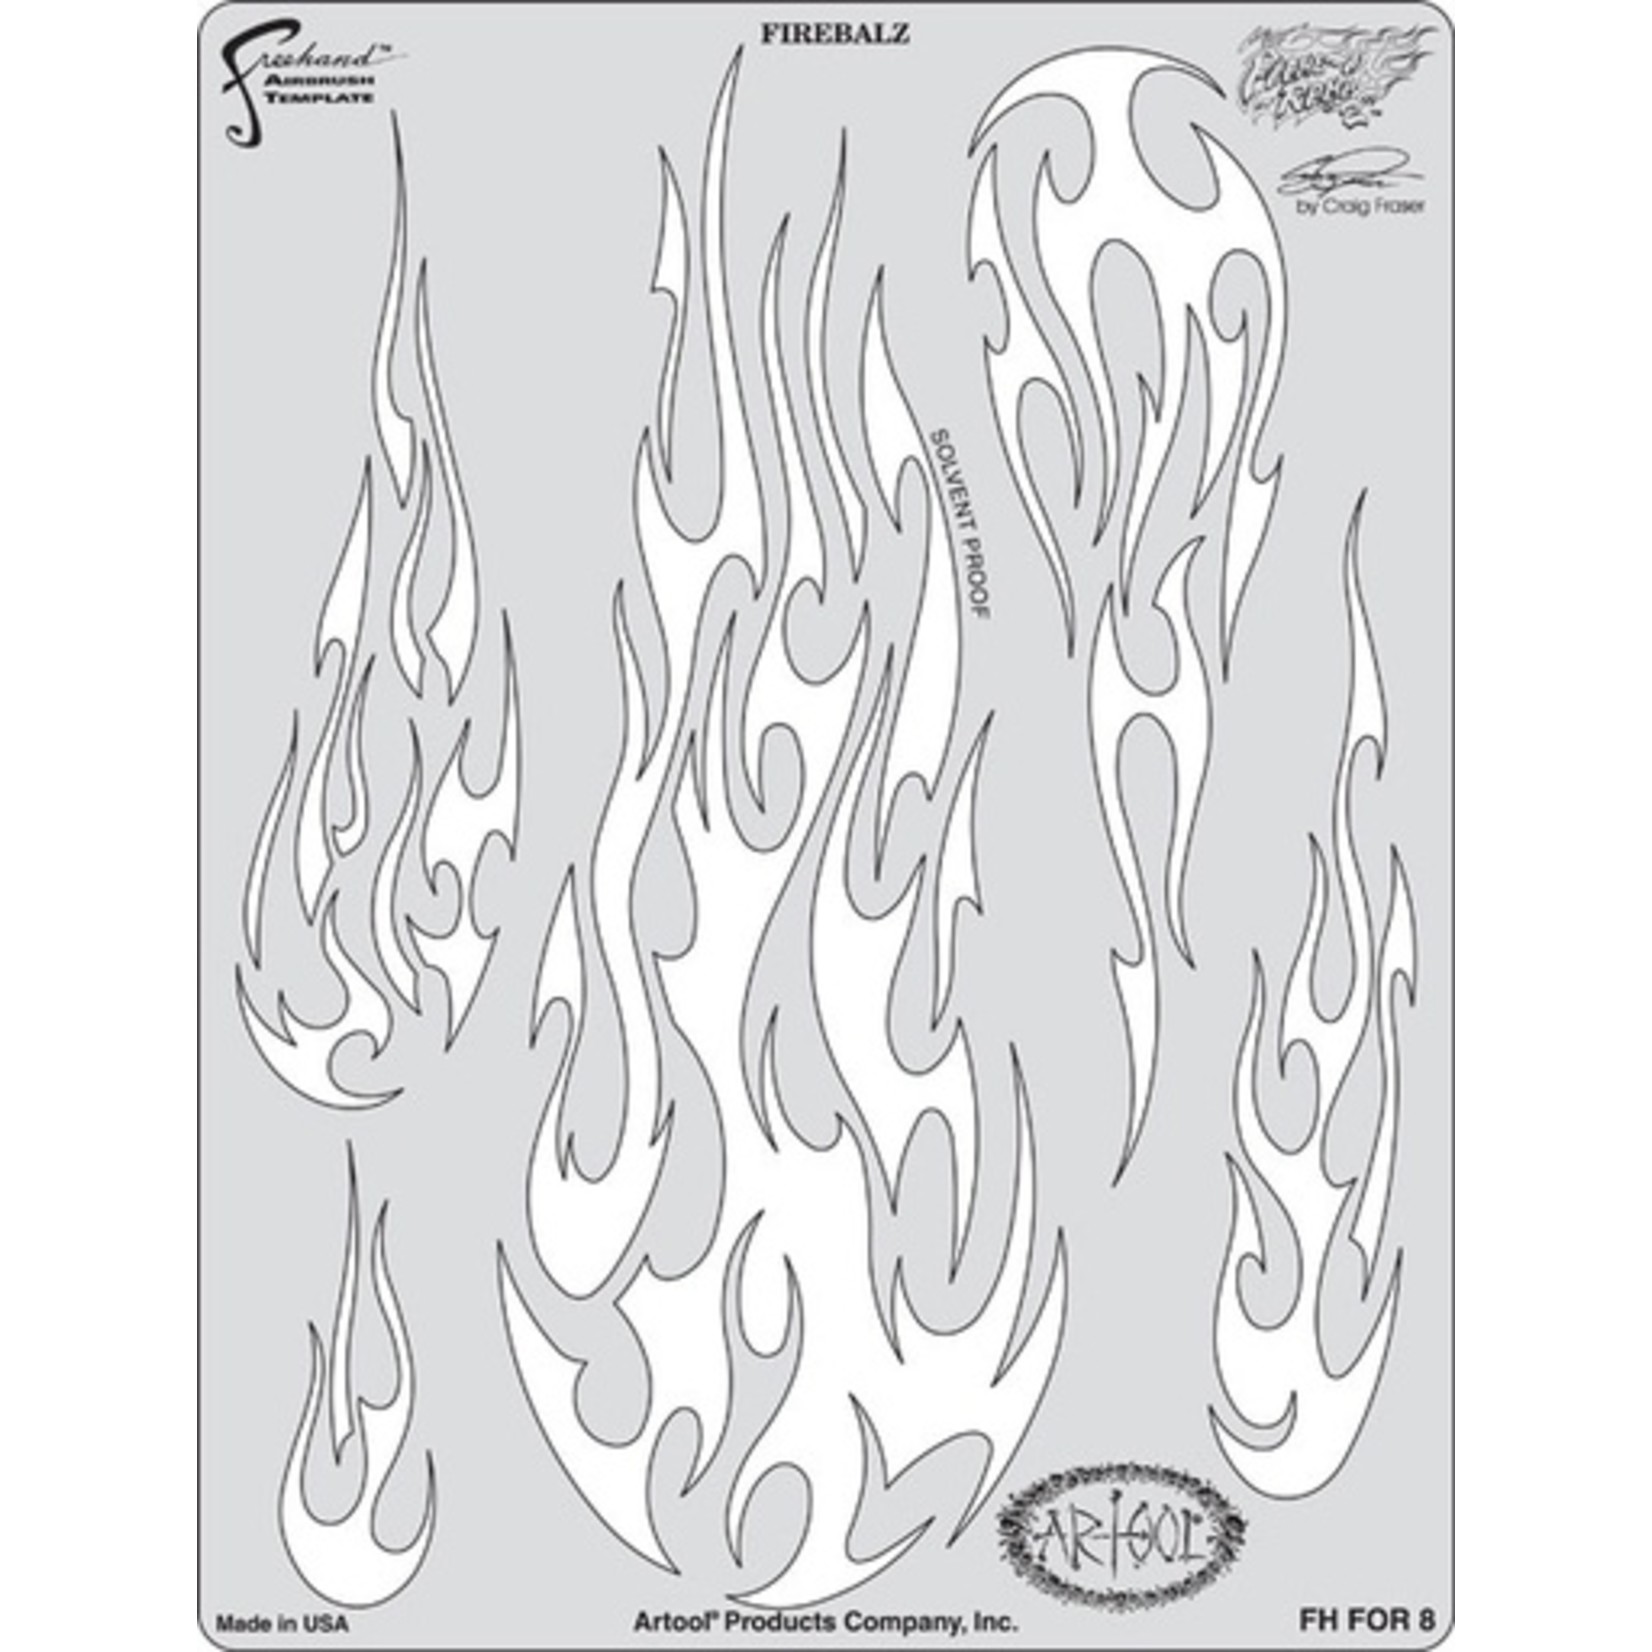 ARTOOLPRODUCTS ARTOOL FREEHAND AIRBRUSH TEMPLATE FOR8 FIRE BALZ